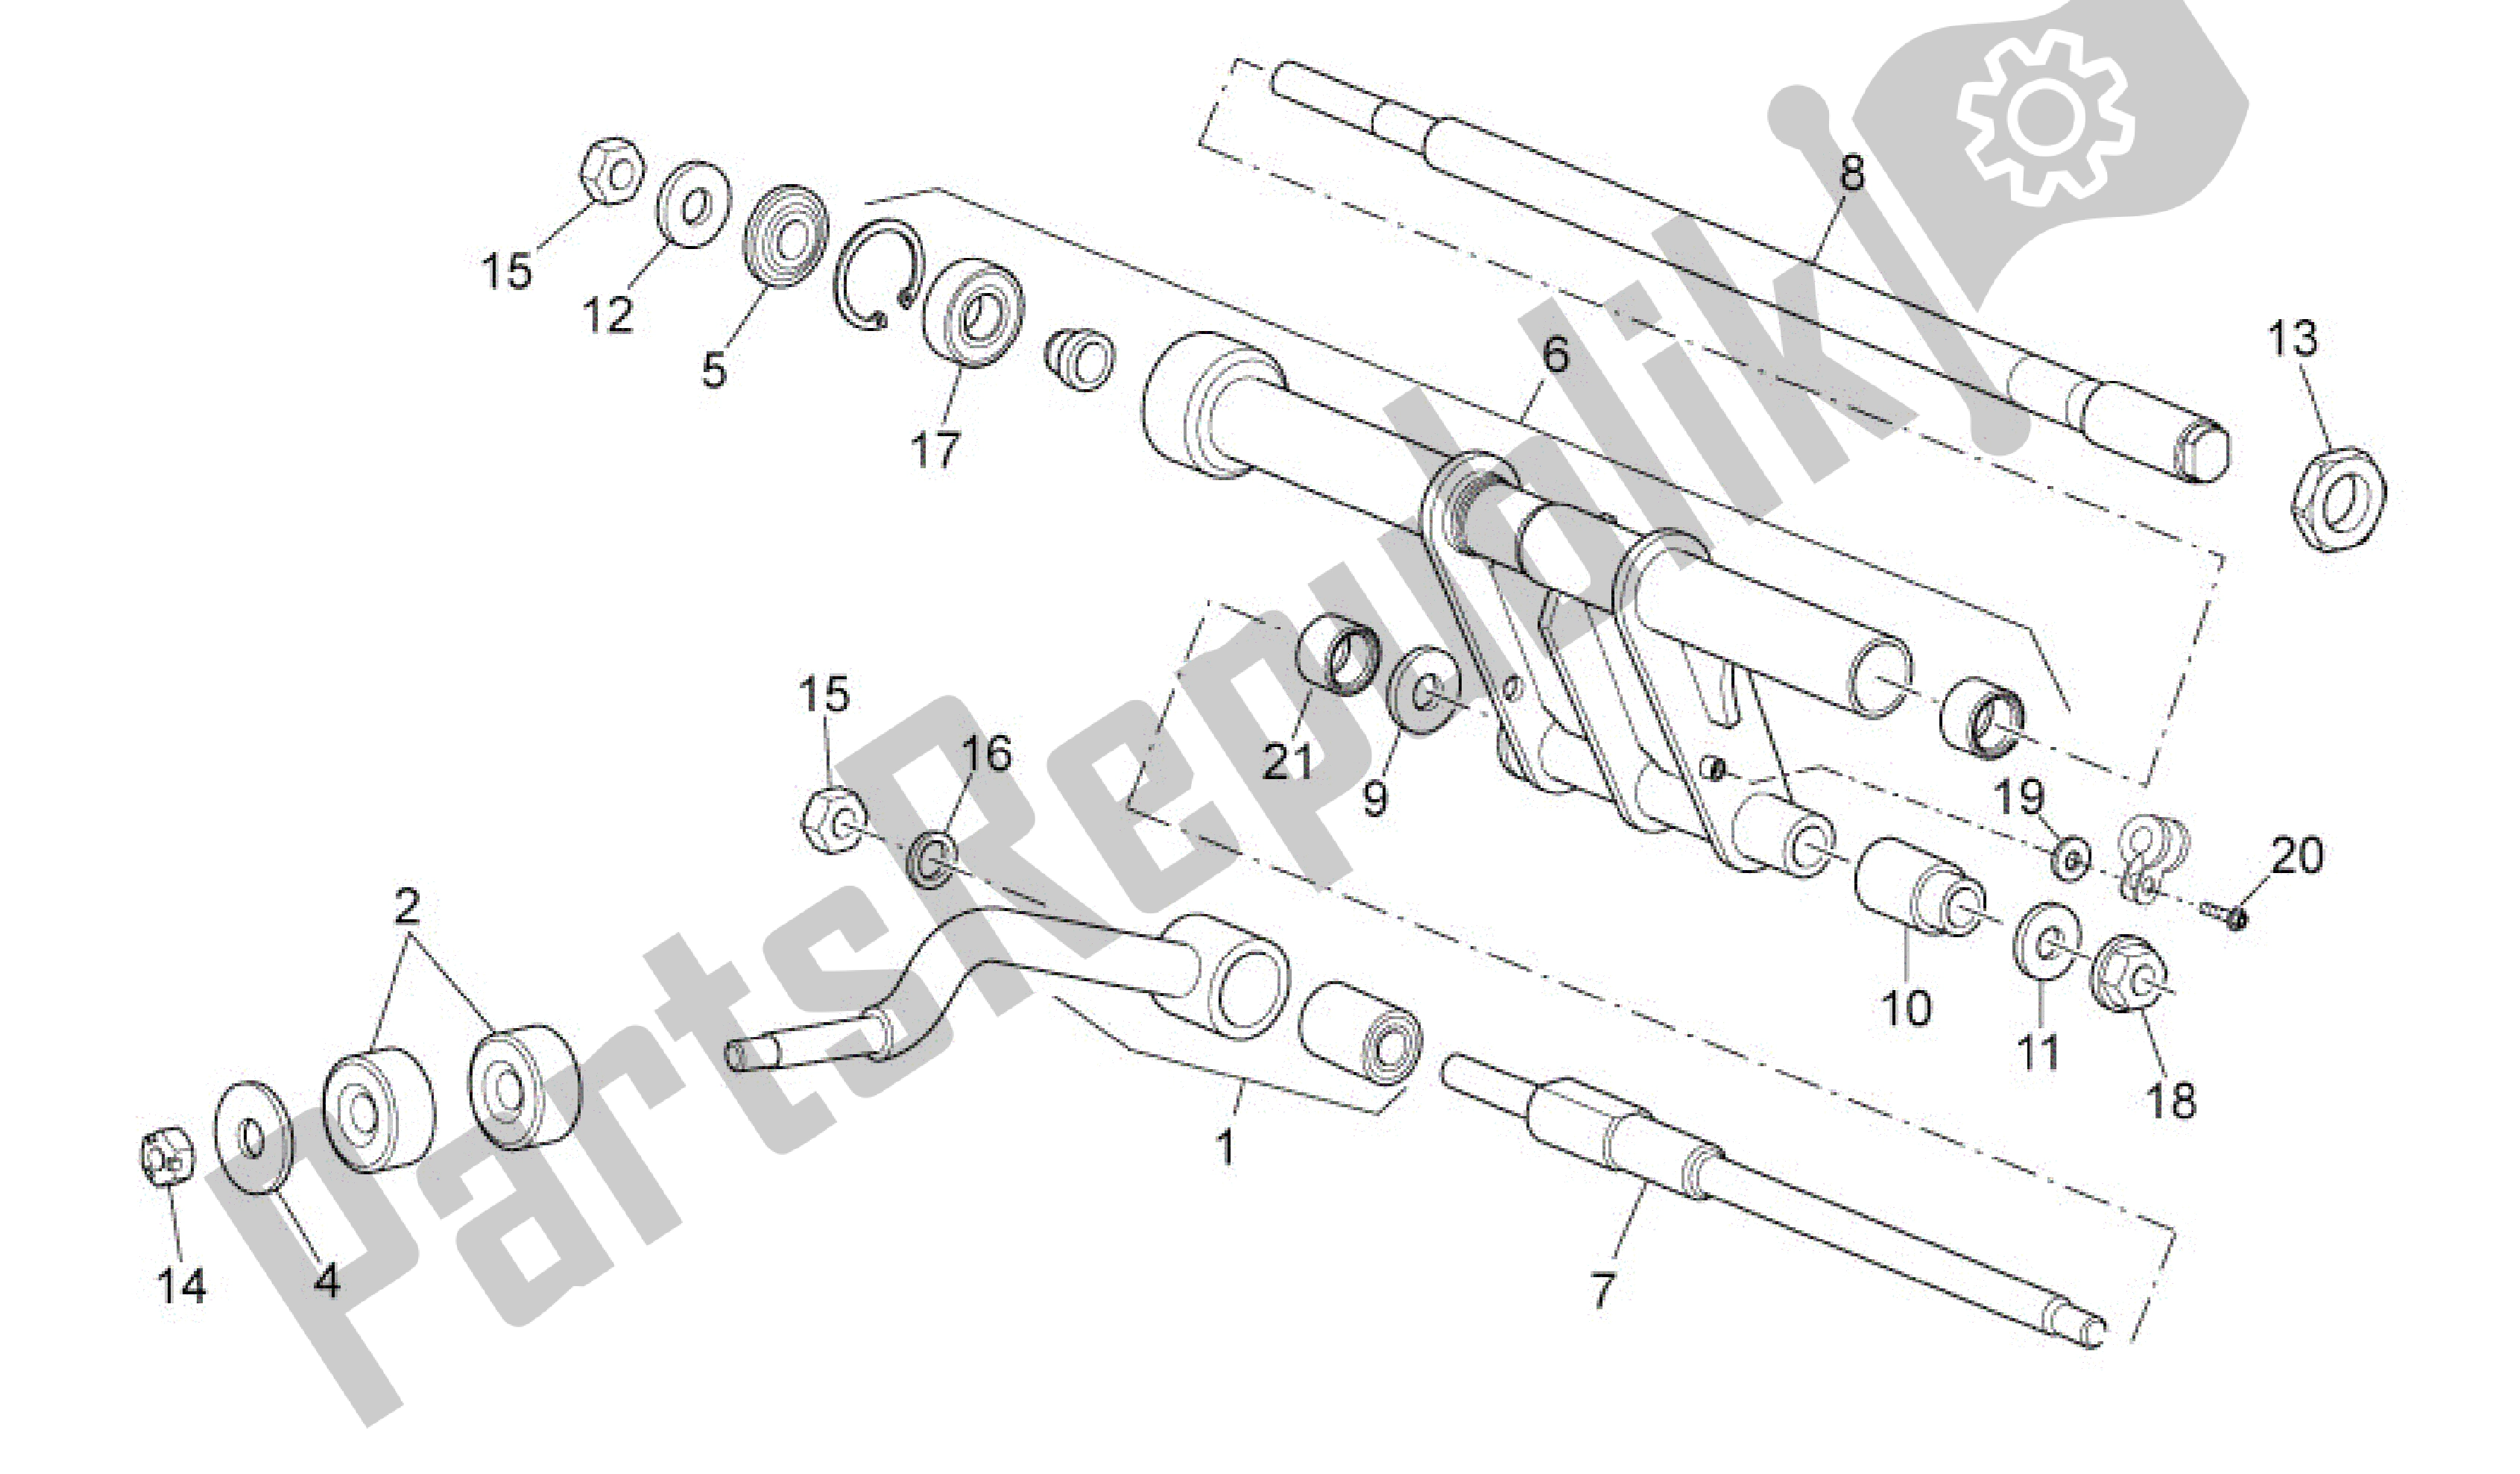 All parts for the Connecting Rod of the Aprilia Scarabeo 500 2006 - 2008